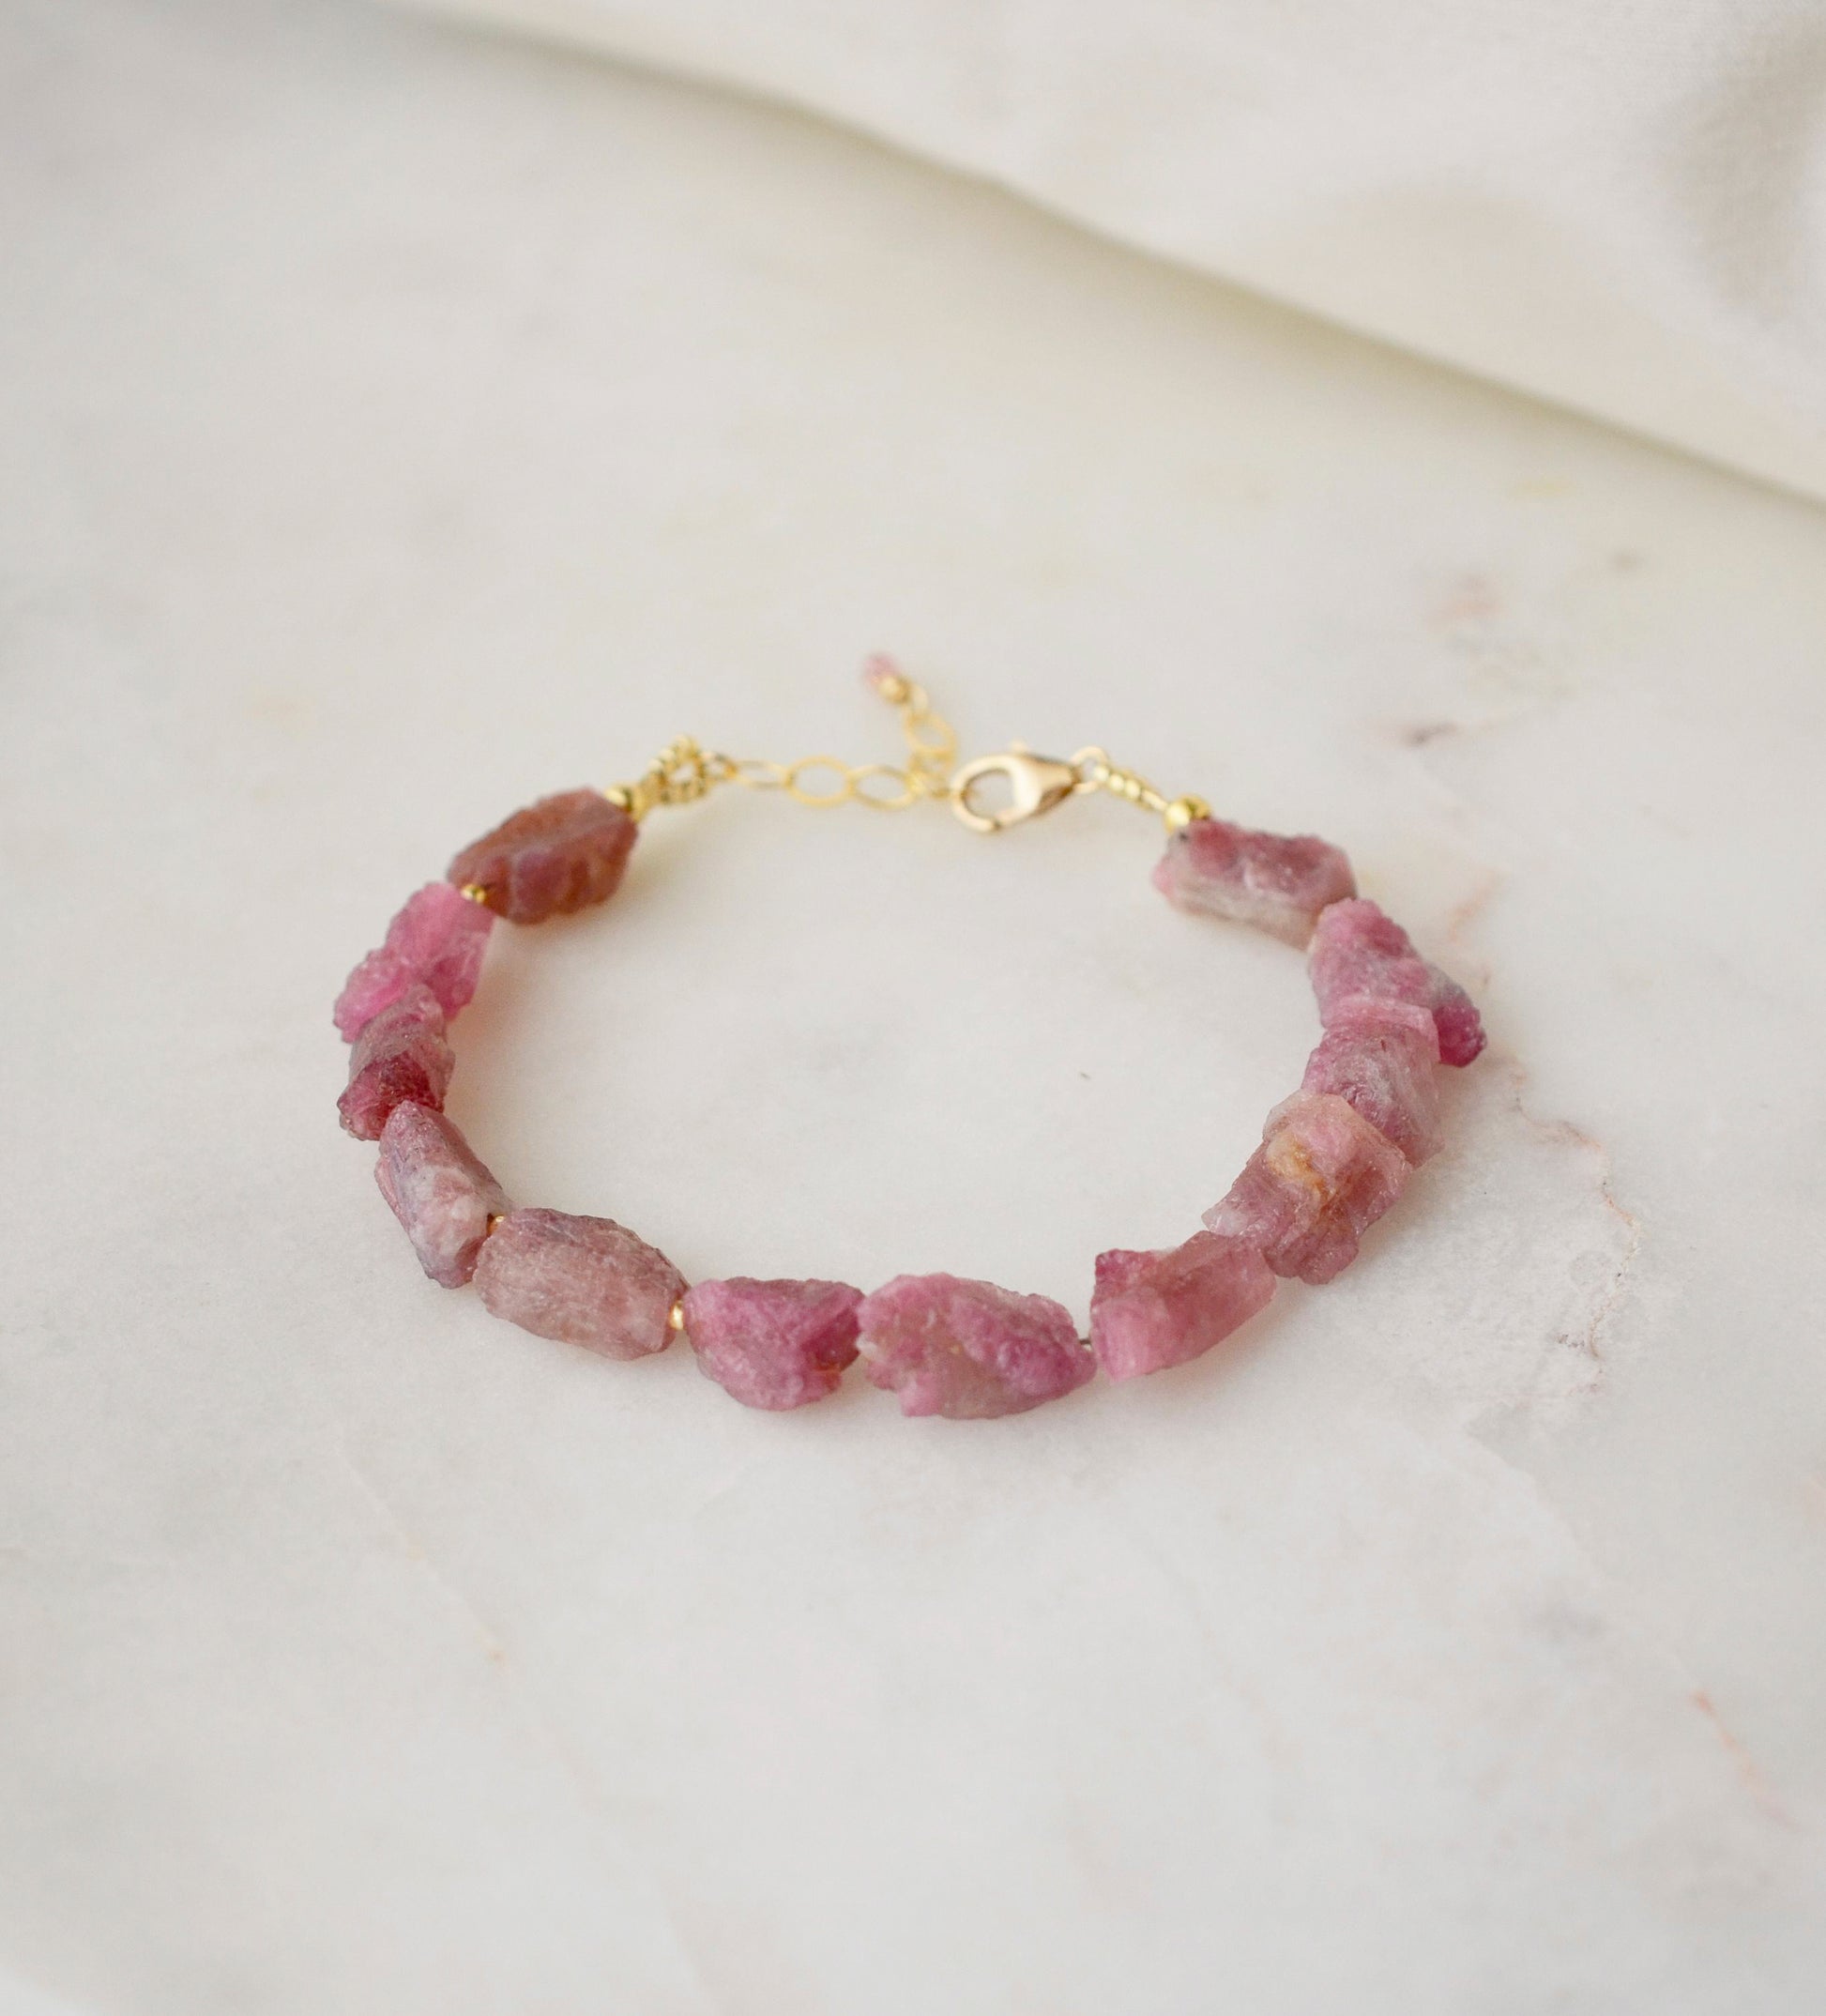 Raw pink tourmaline bracelet with tiny gold beads in-between each stone. The adjustable style is shown.